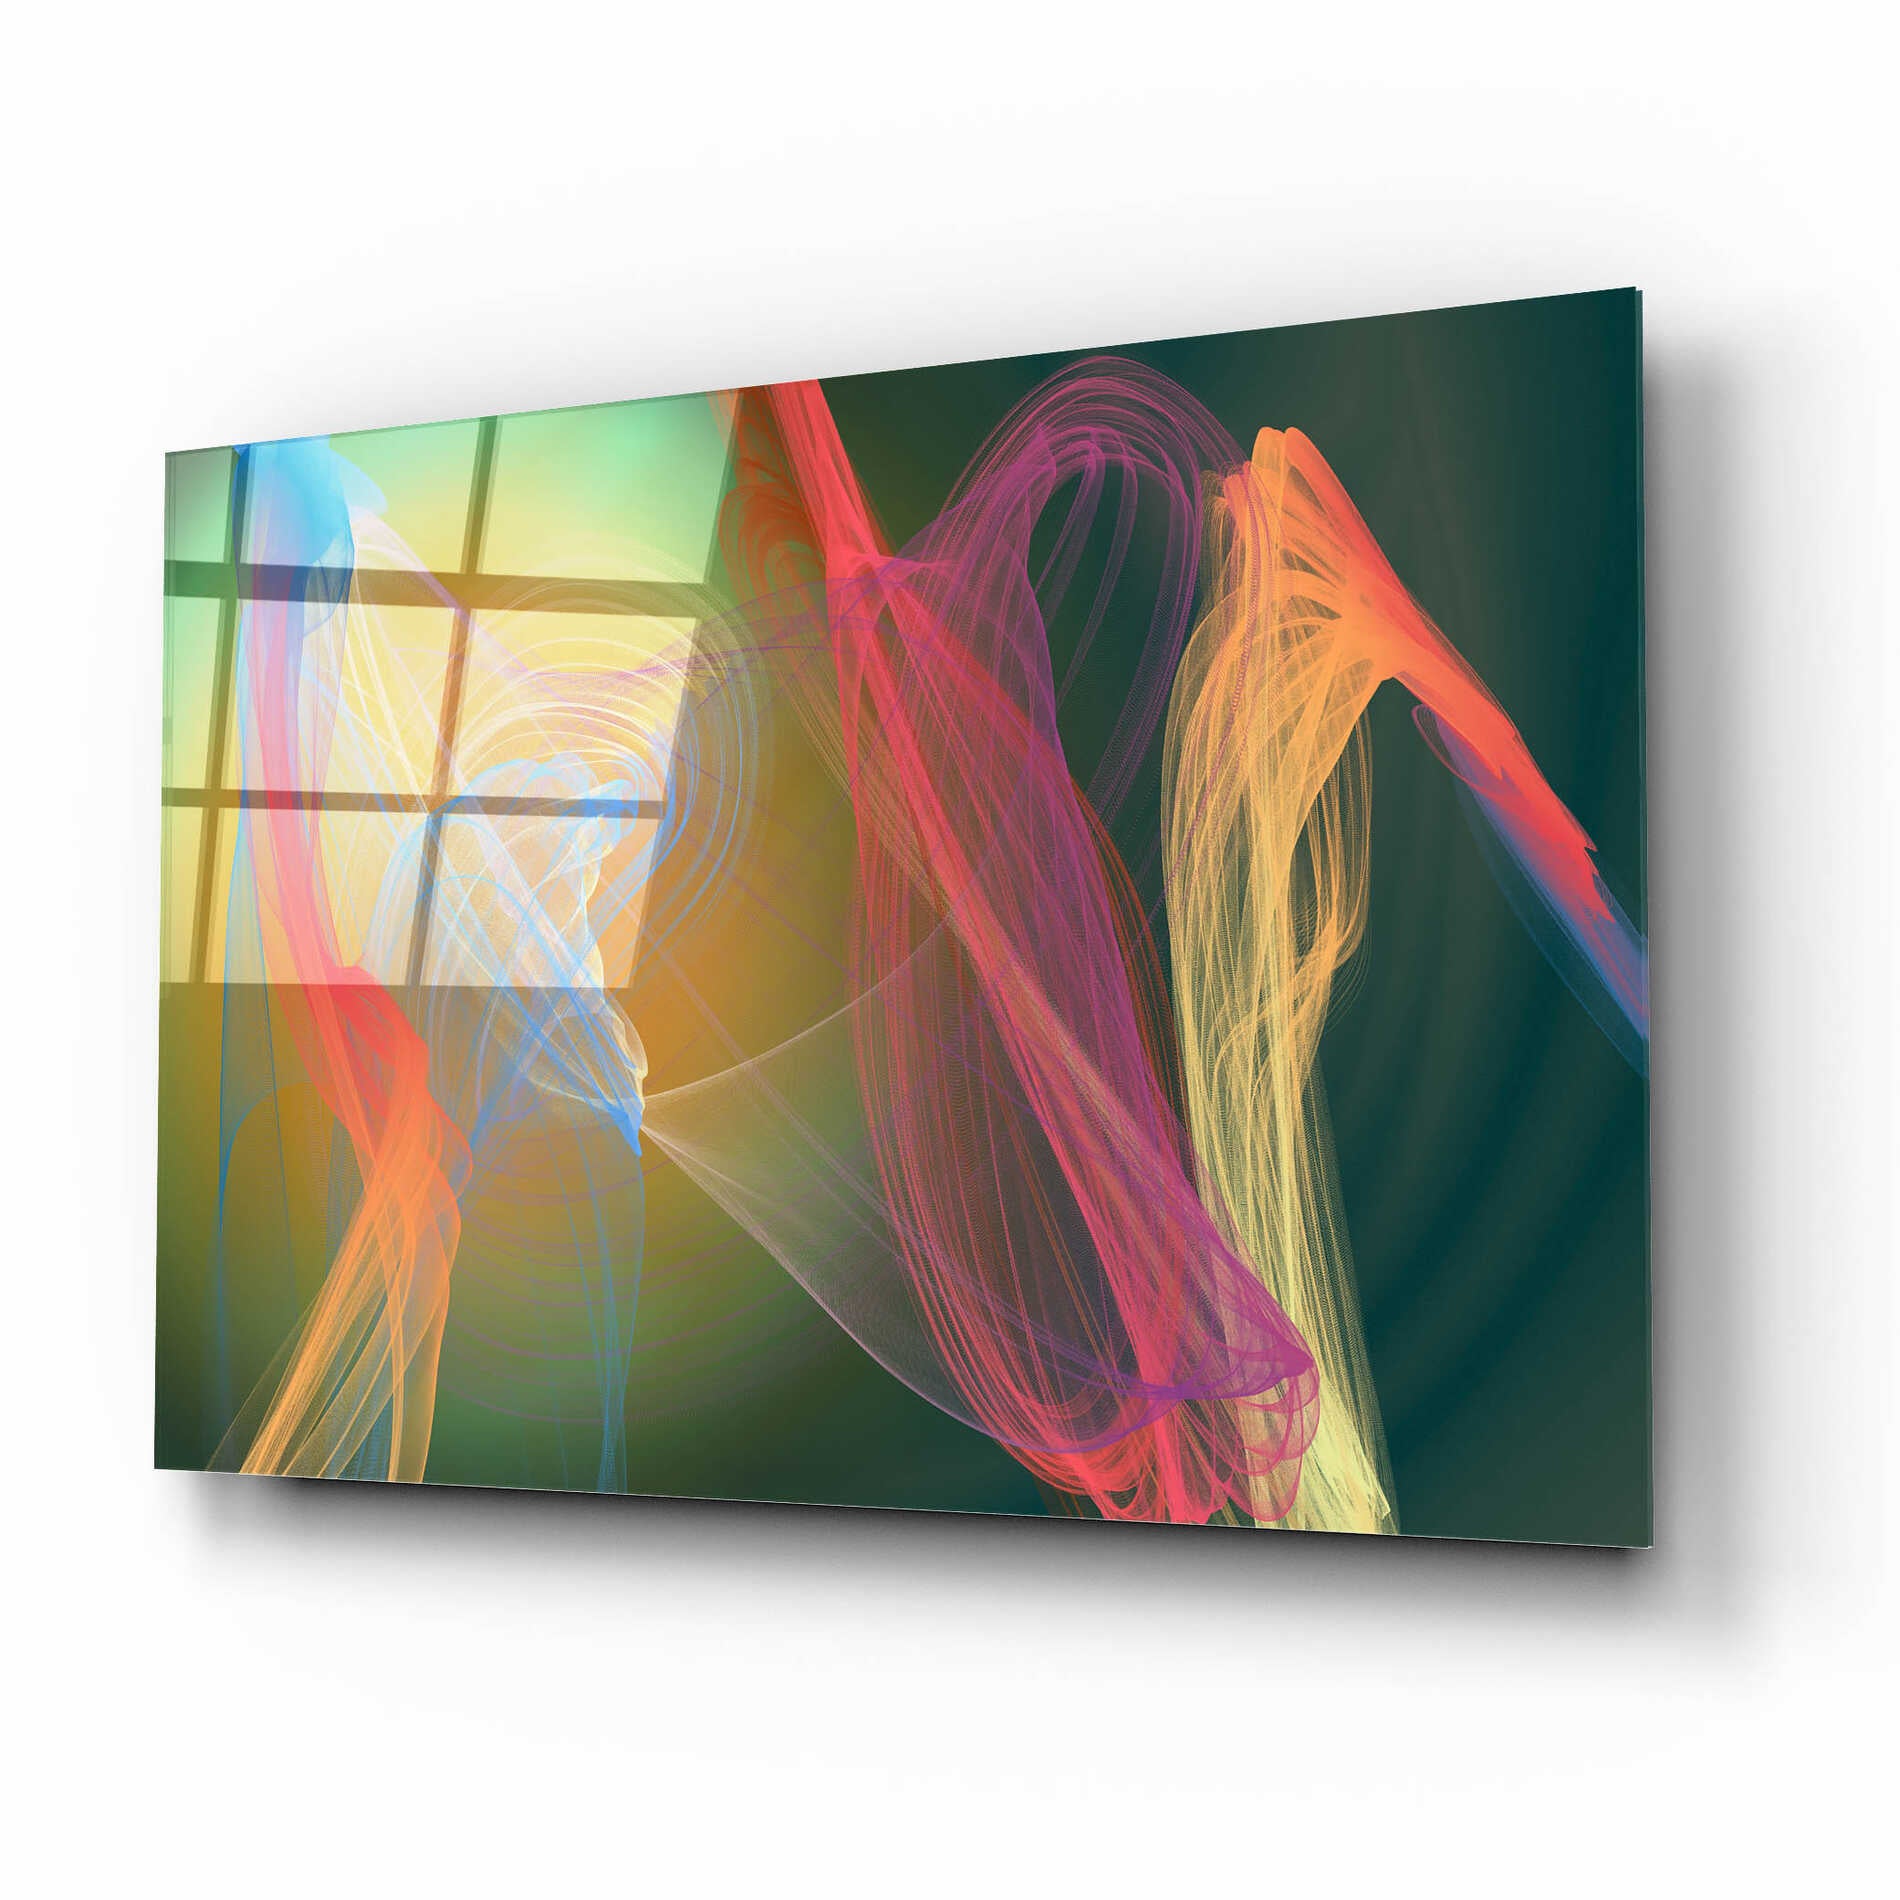 Epic Art 'Inverted Color In The Lines 9' by Irena Orlov Acrylic Glass Wall Art,16x12